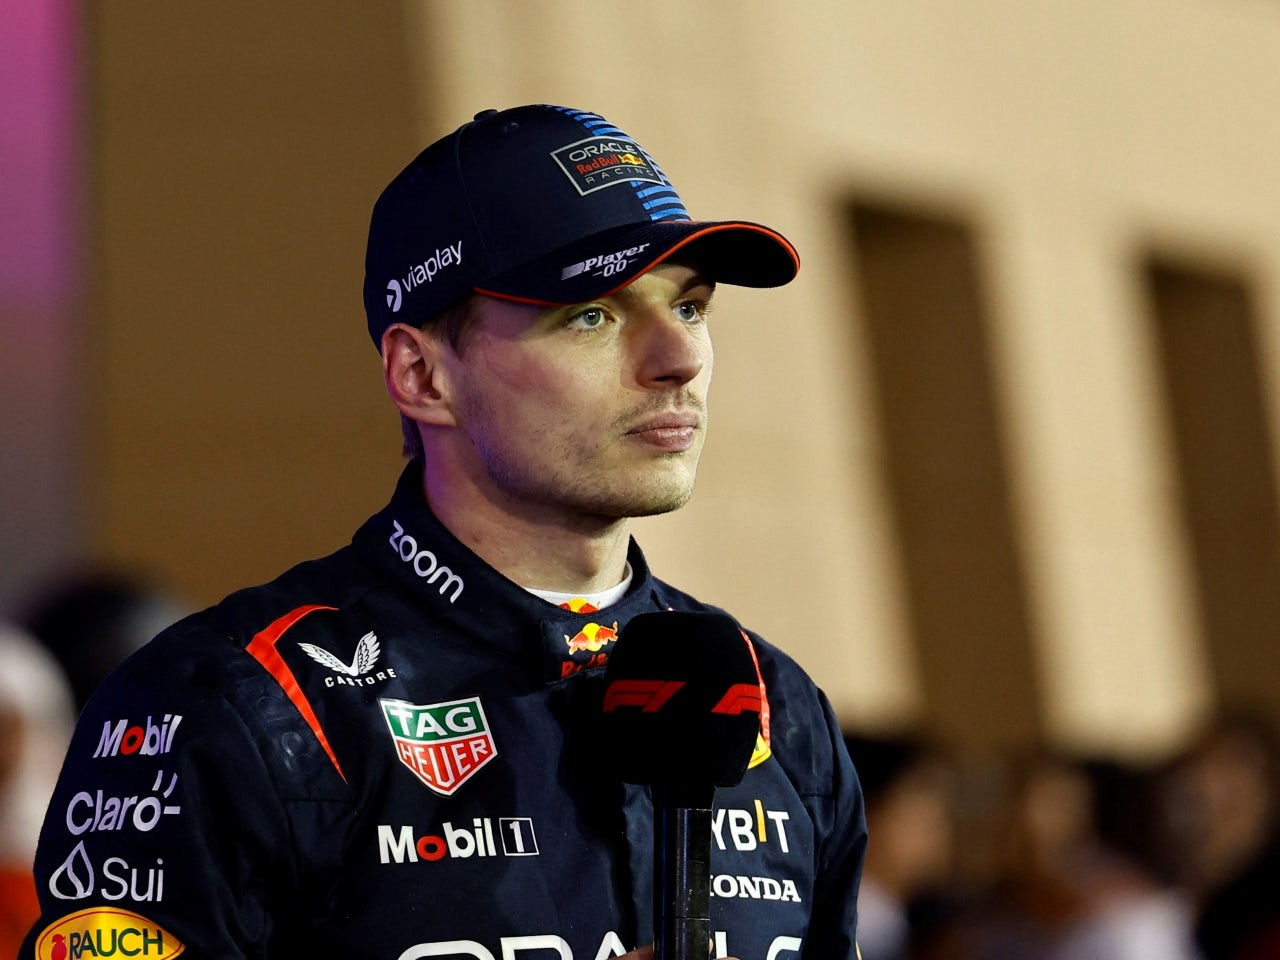 Speculation grows over Verstappen's rare DNF amid Red Bull unrest